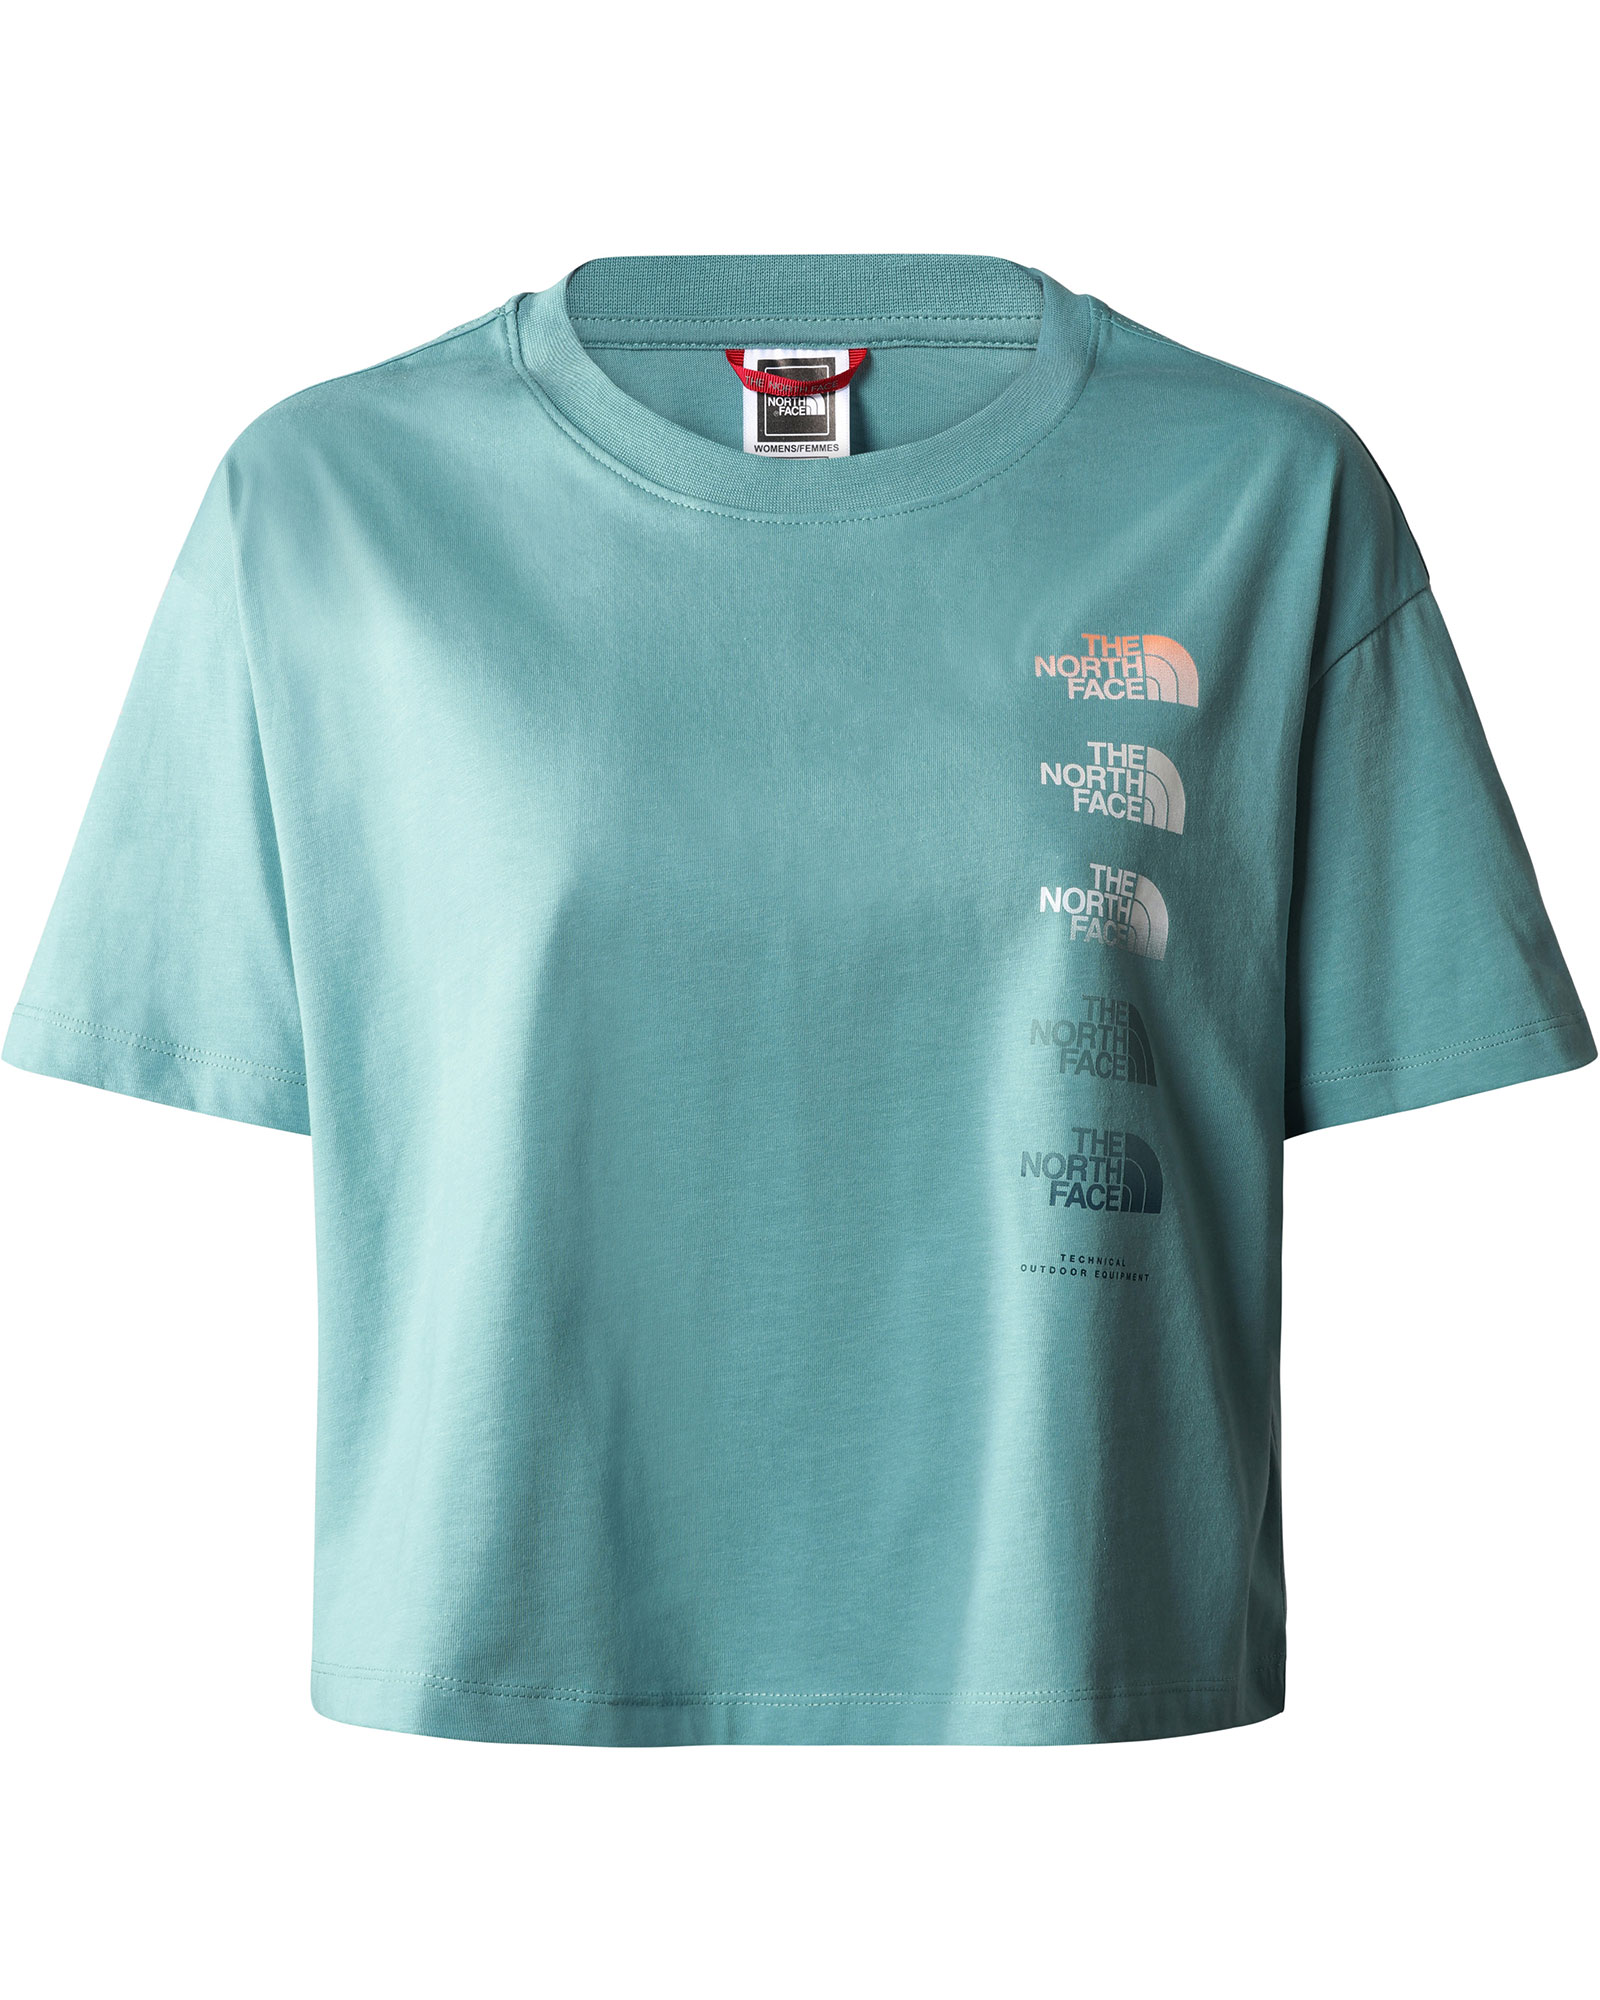 The North Face Women’s D2 Graphic Crop T Shirt - Reef Waters XS